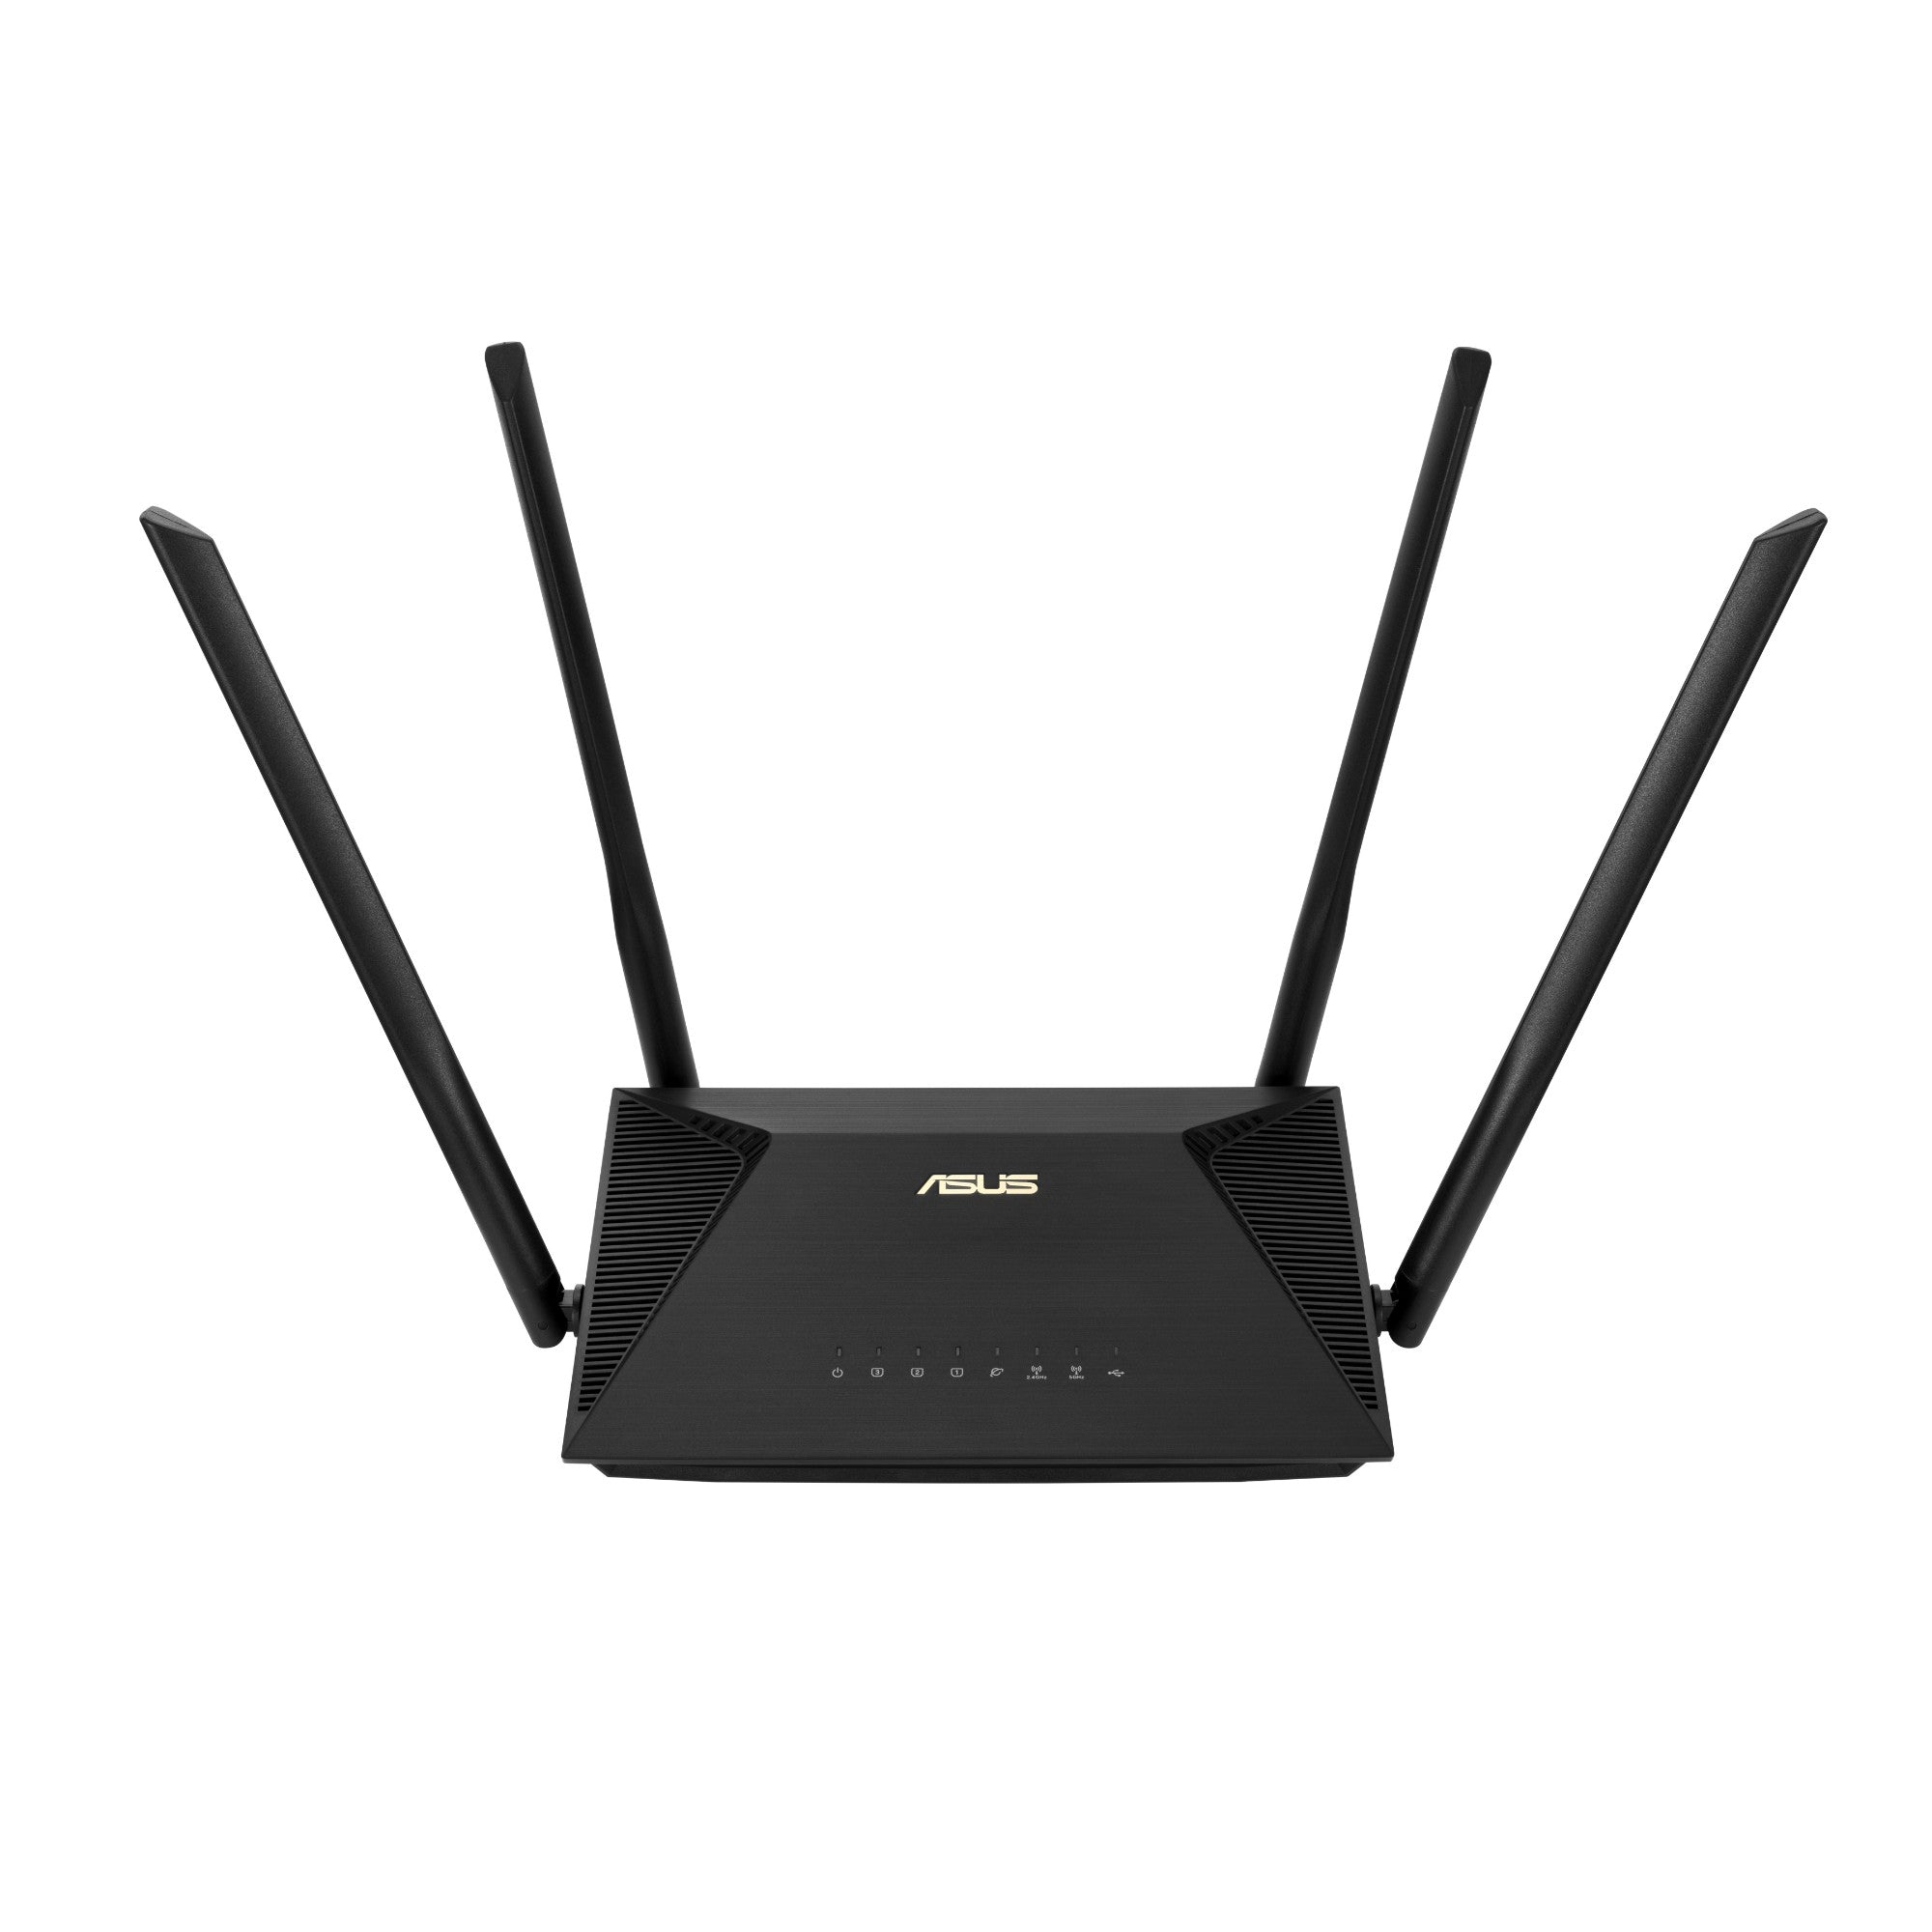 ASUS Rt-Ax53U Wireless Router Gigabit Ethernet Dual-Band (2.4 Ghz 5 Ghz) 3G 5G 4G Black-(90IG06P0-MO3500)